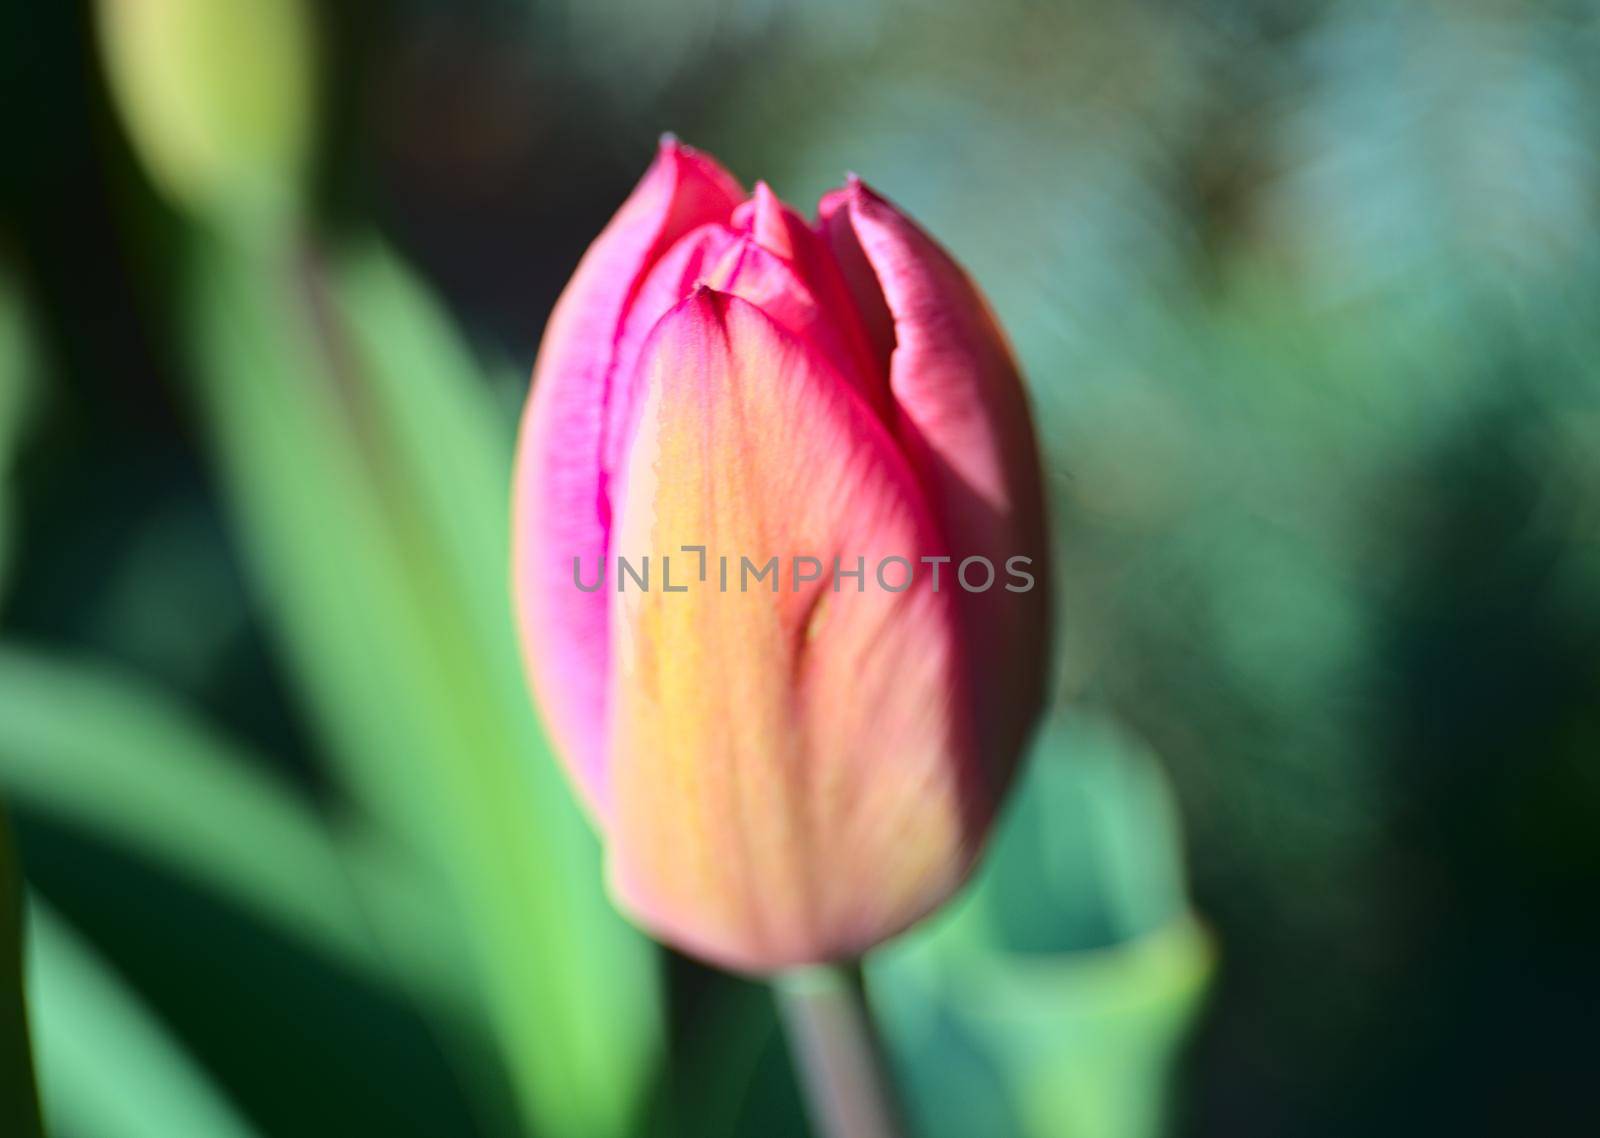 Tulips in blossom by Jindrich_Blecha